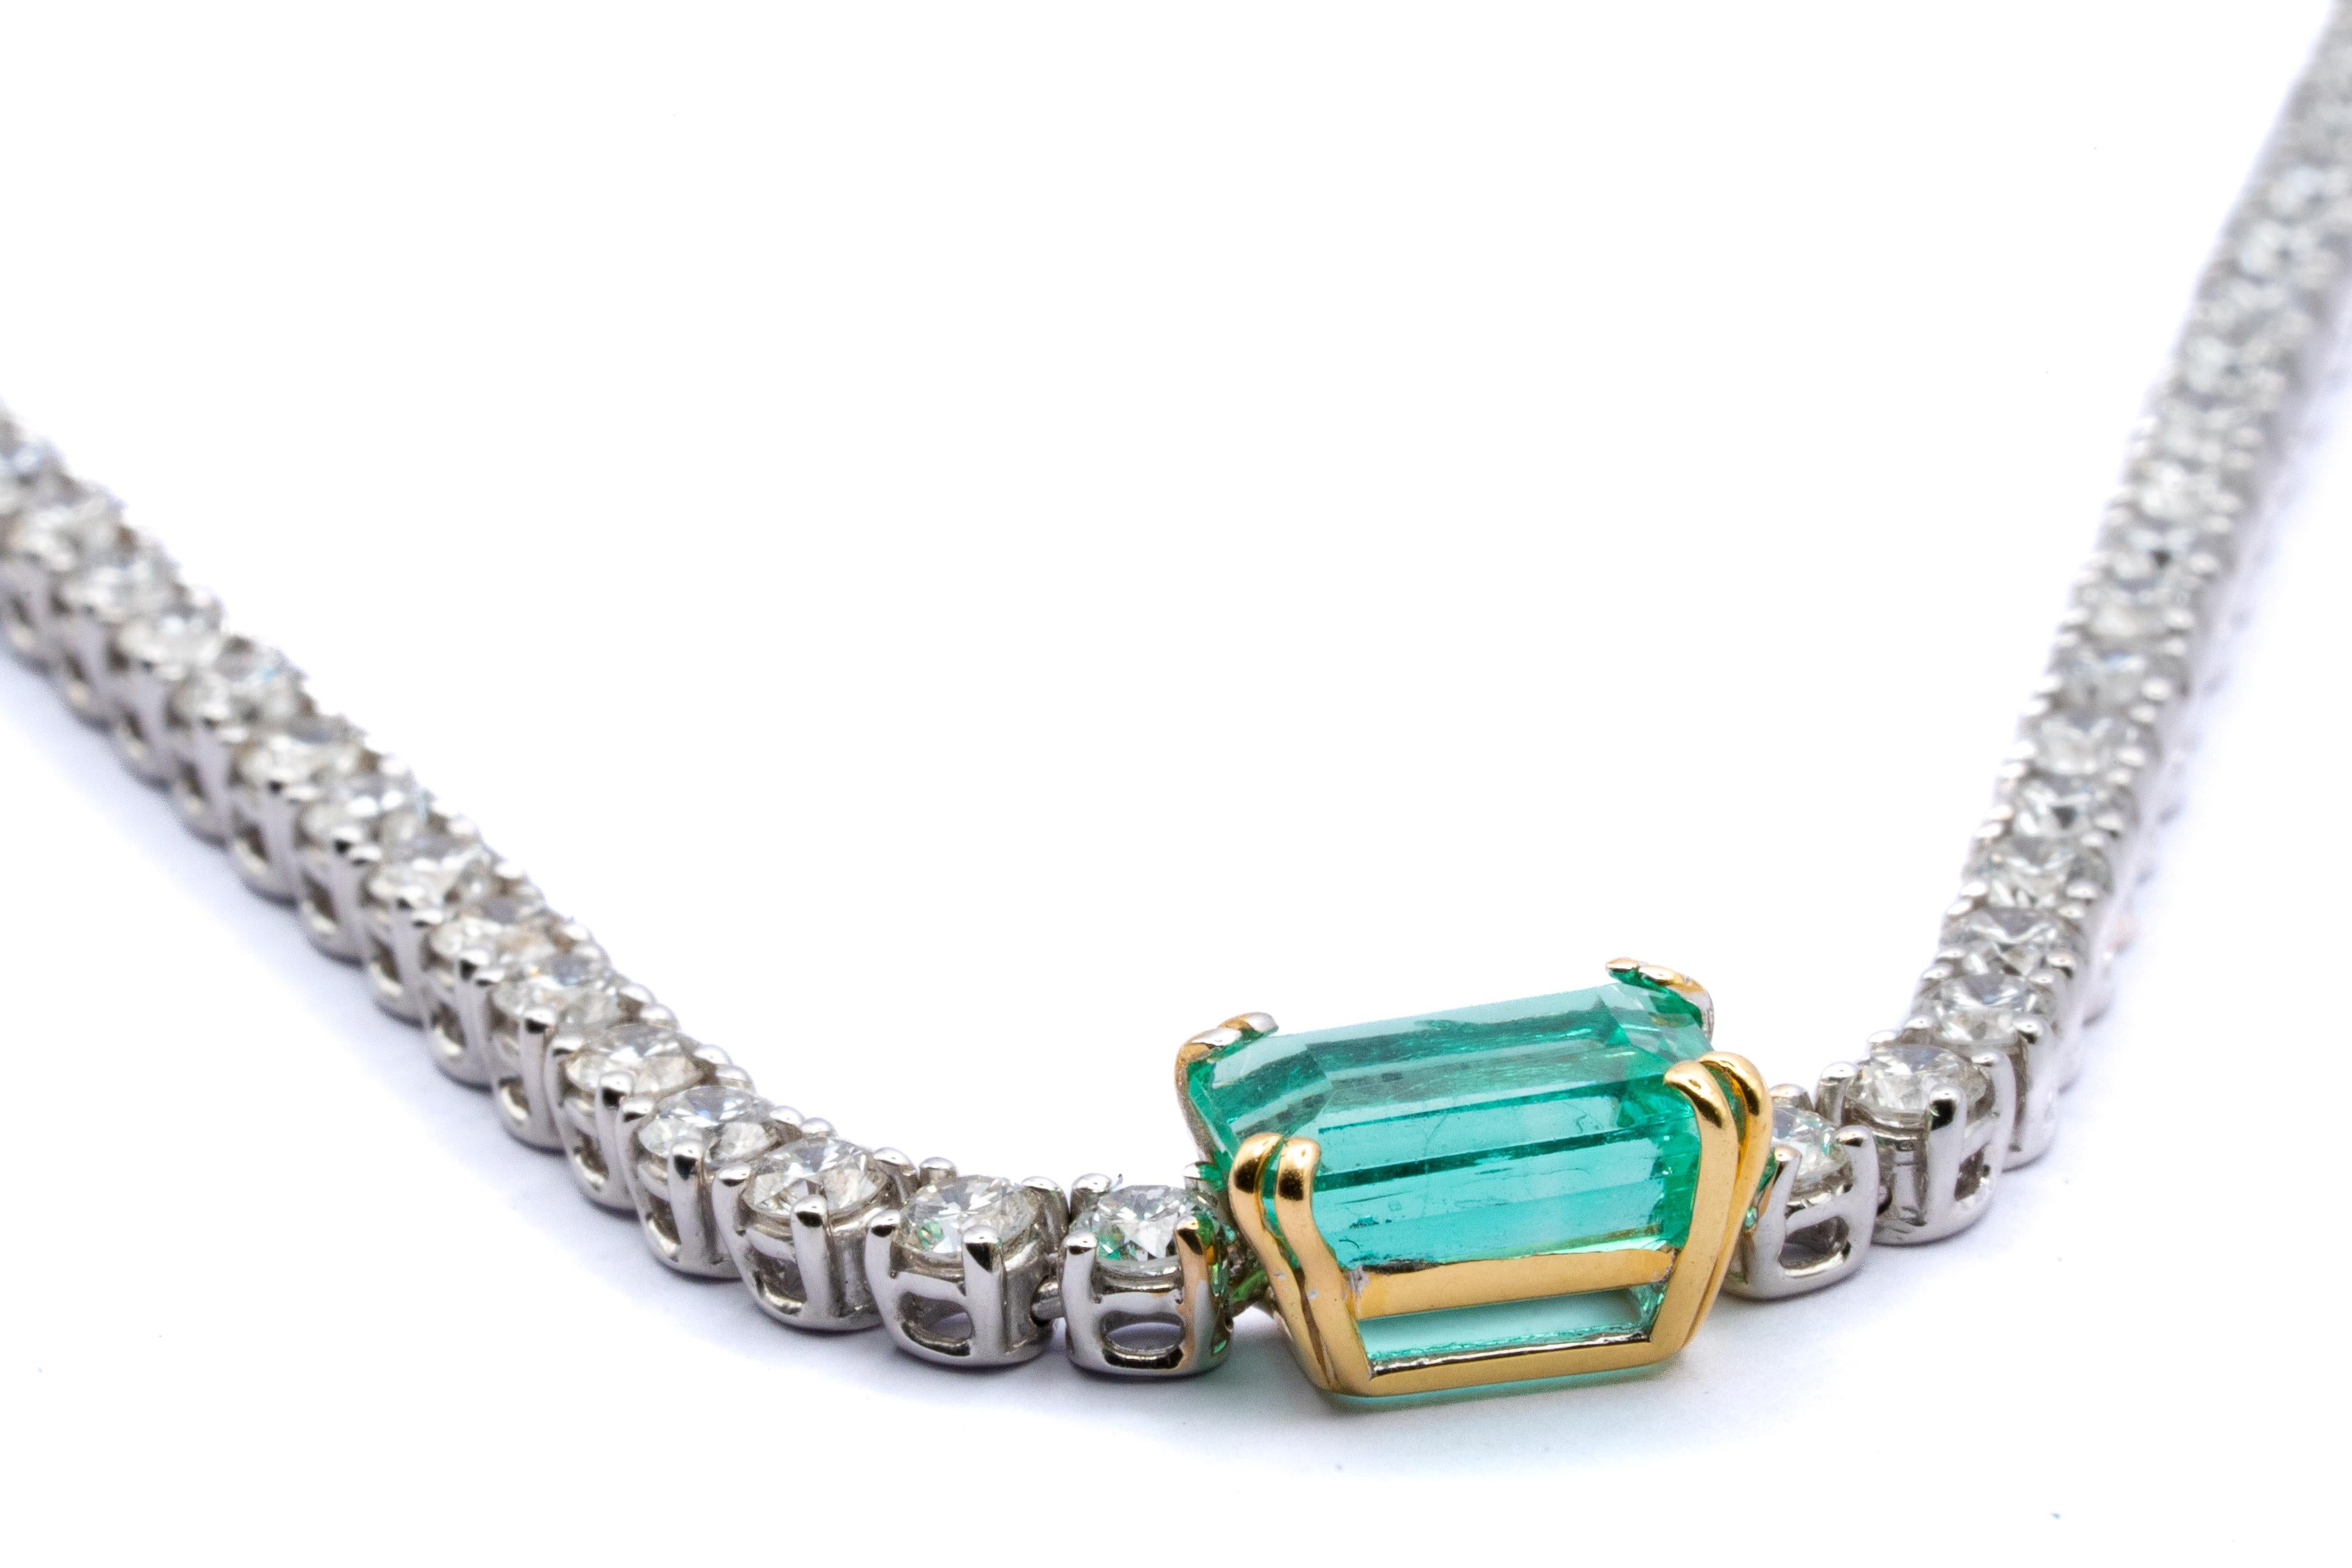 This wonderful 18 carat white gold tennis necklace boasts 102 VS G color diamonds for a total of 7.25 carats plus a central Colombian rectangular emerald 2.15  carats. The gold weights 24.55 grams.
A classic masterpiece made in our workshop in